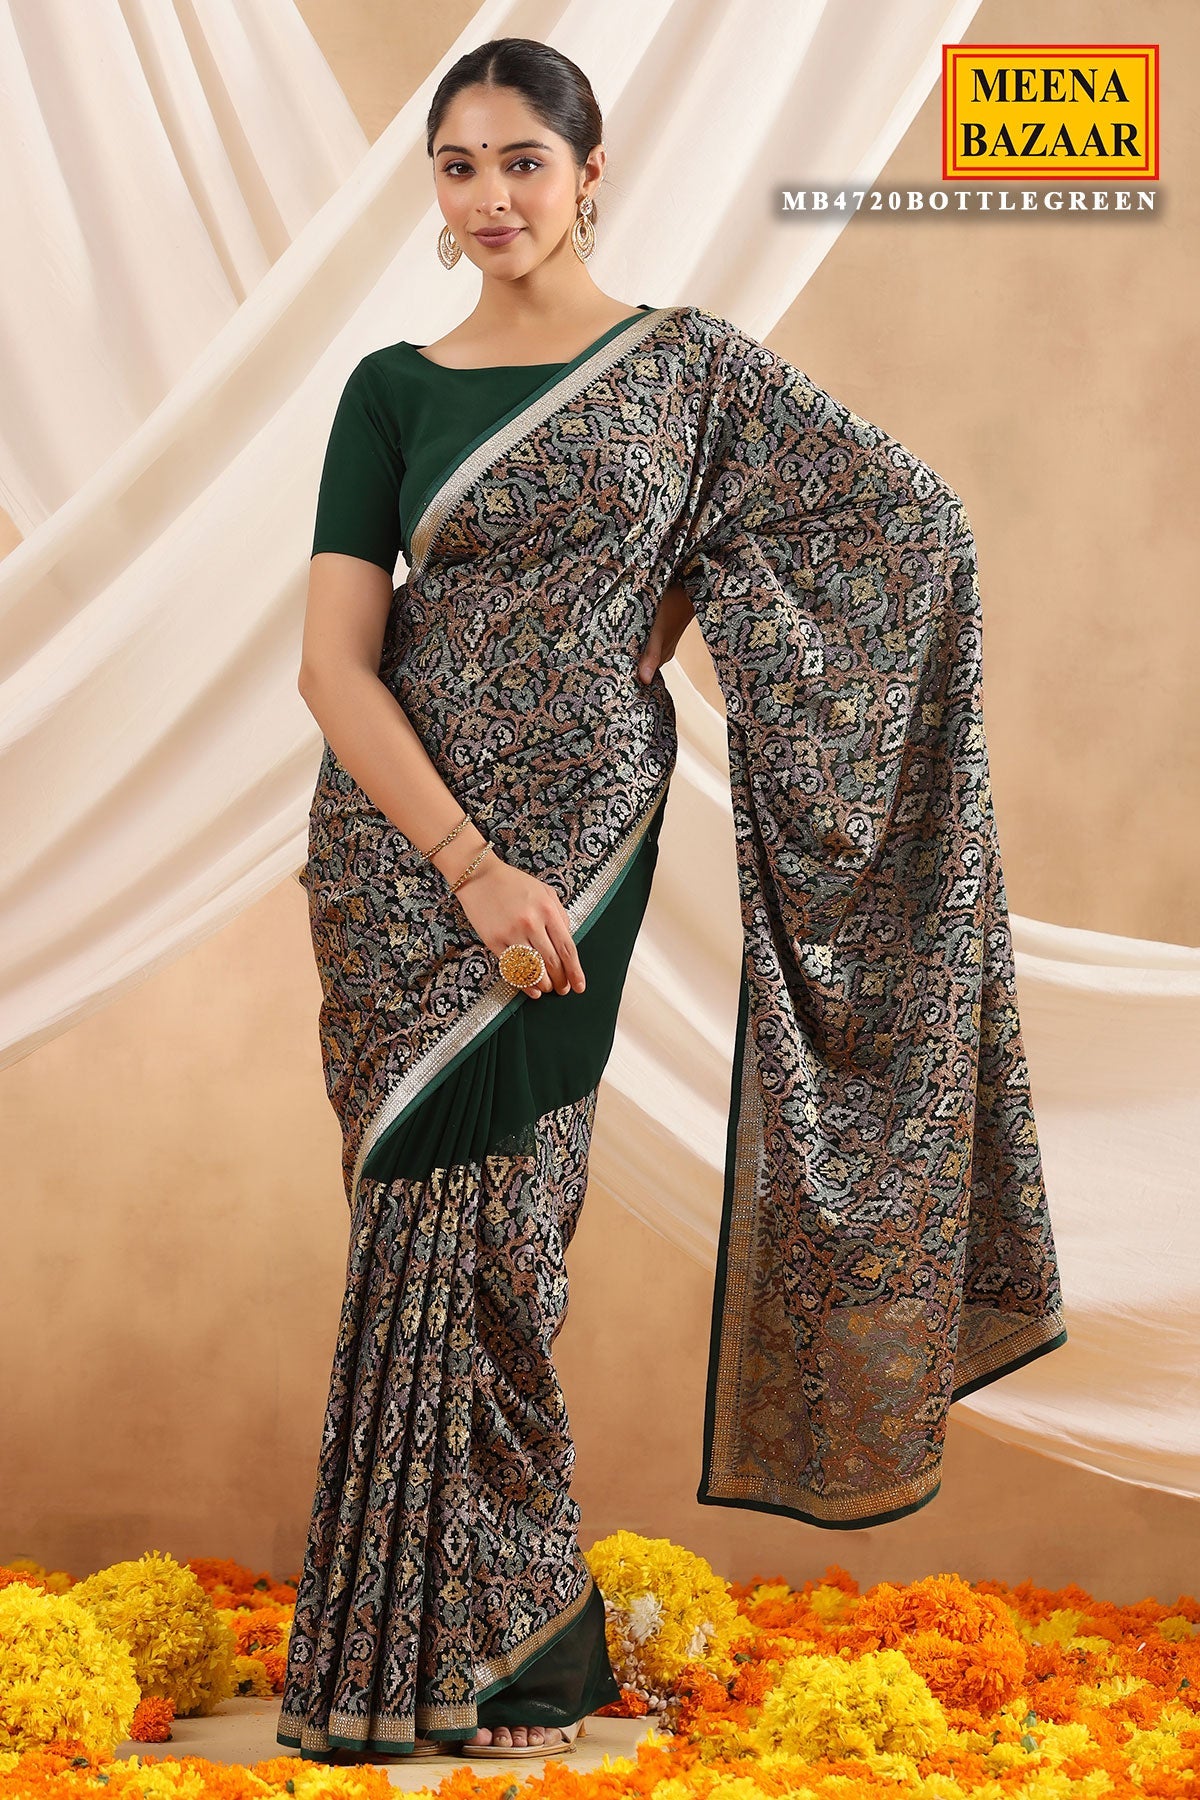 Bottle Green Georgette Embroidered Saree